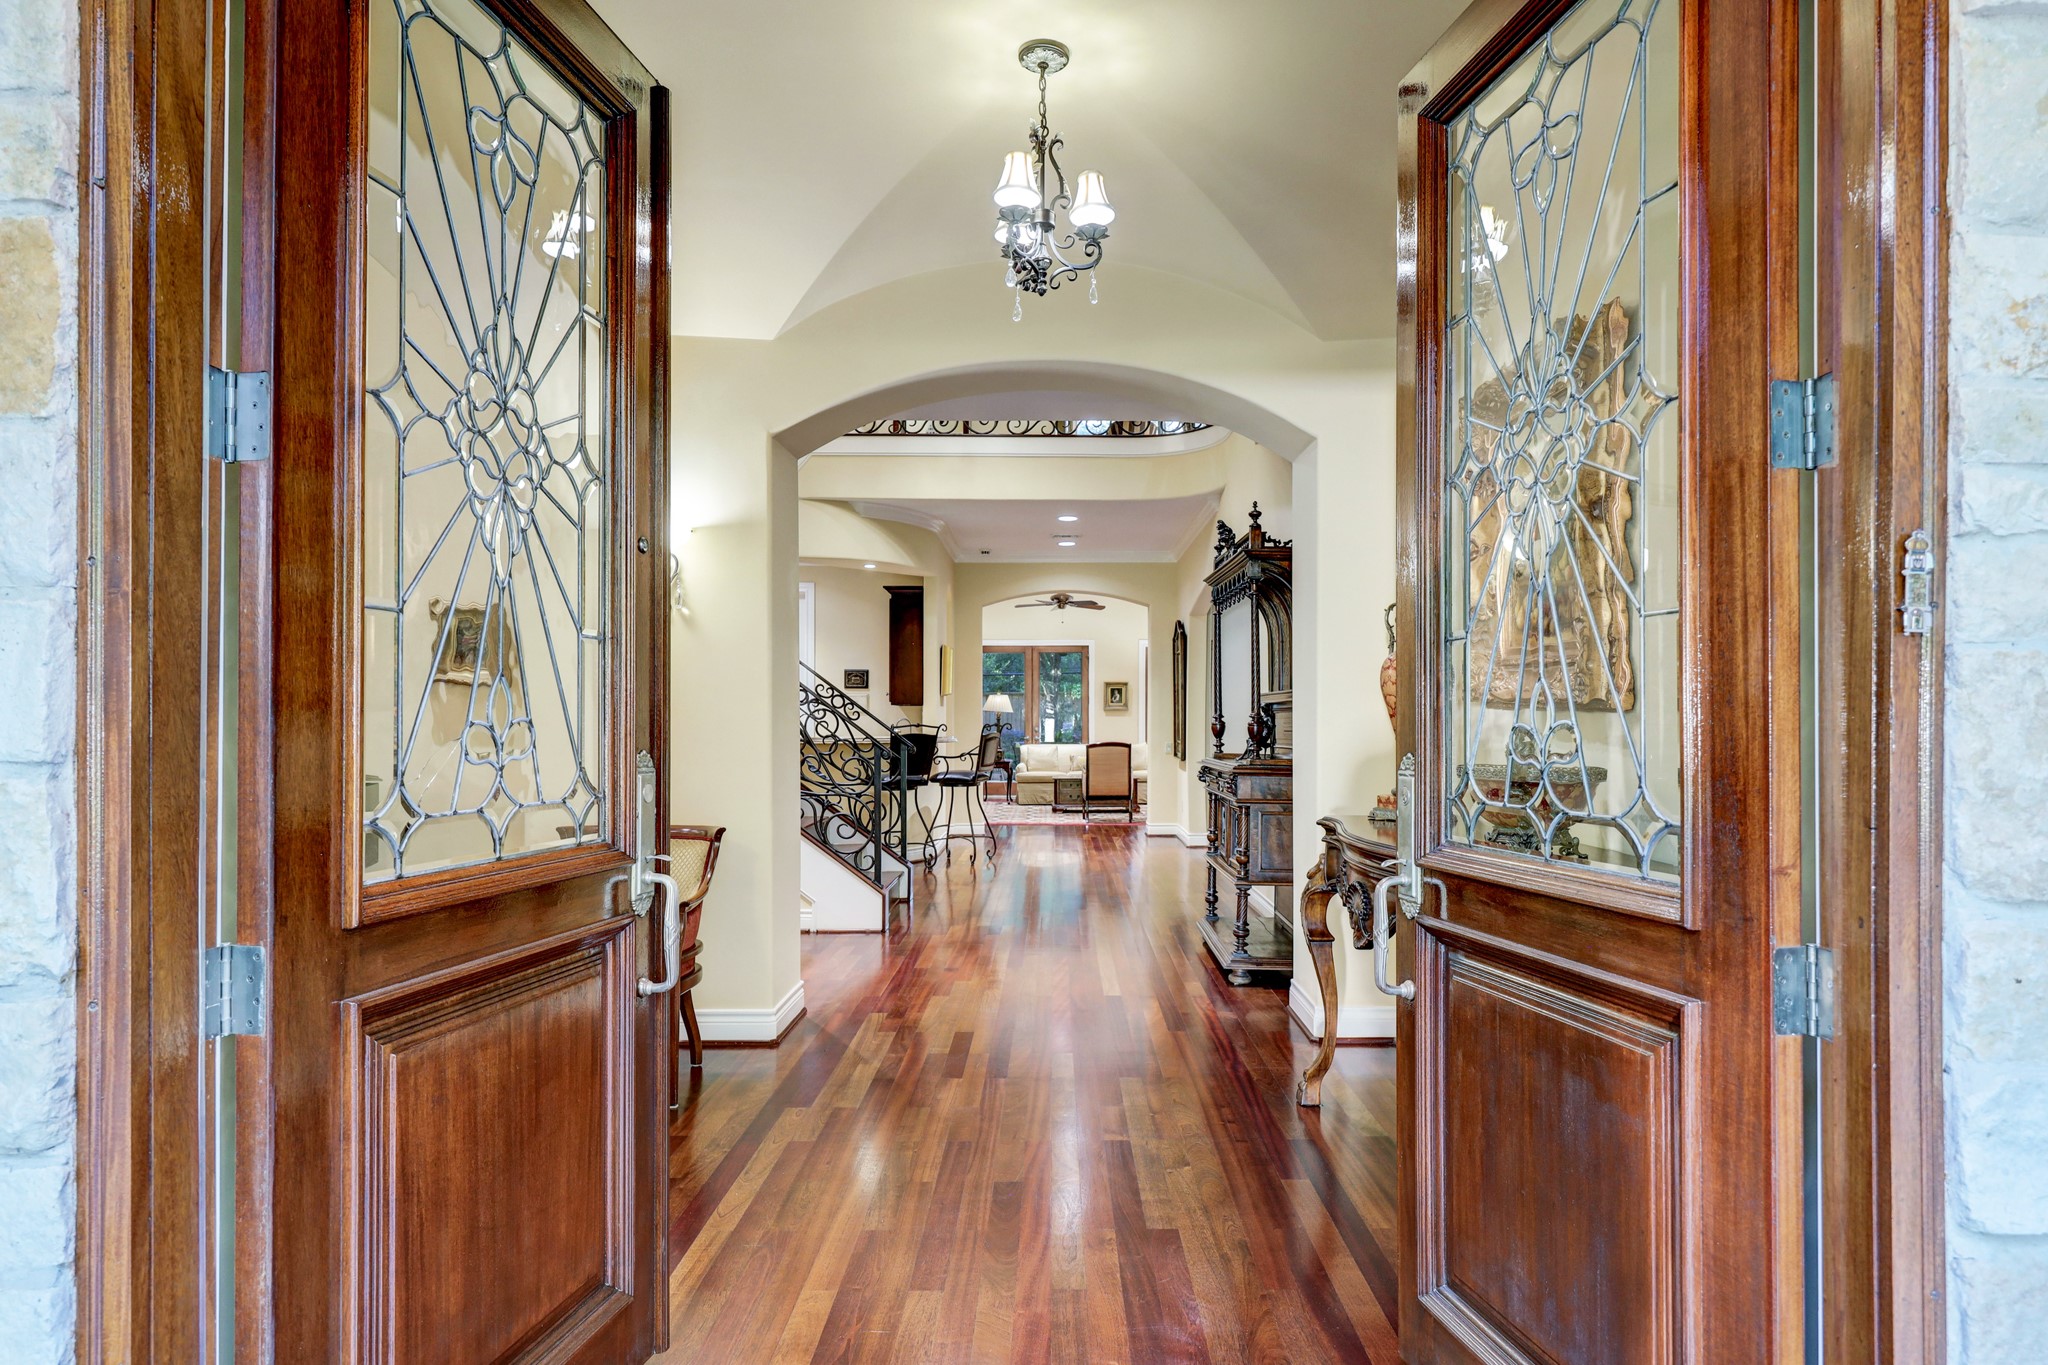 Upon entering through the double front doors, you step into the foyer which leads to the rest of the home.